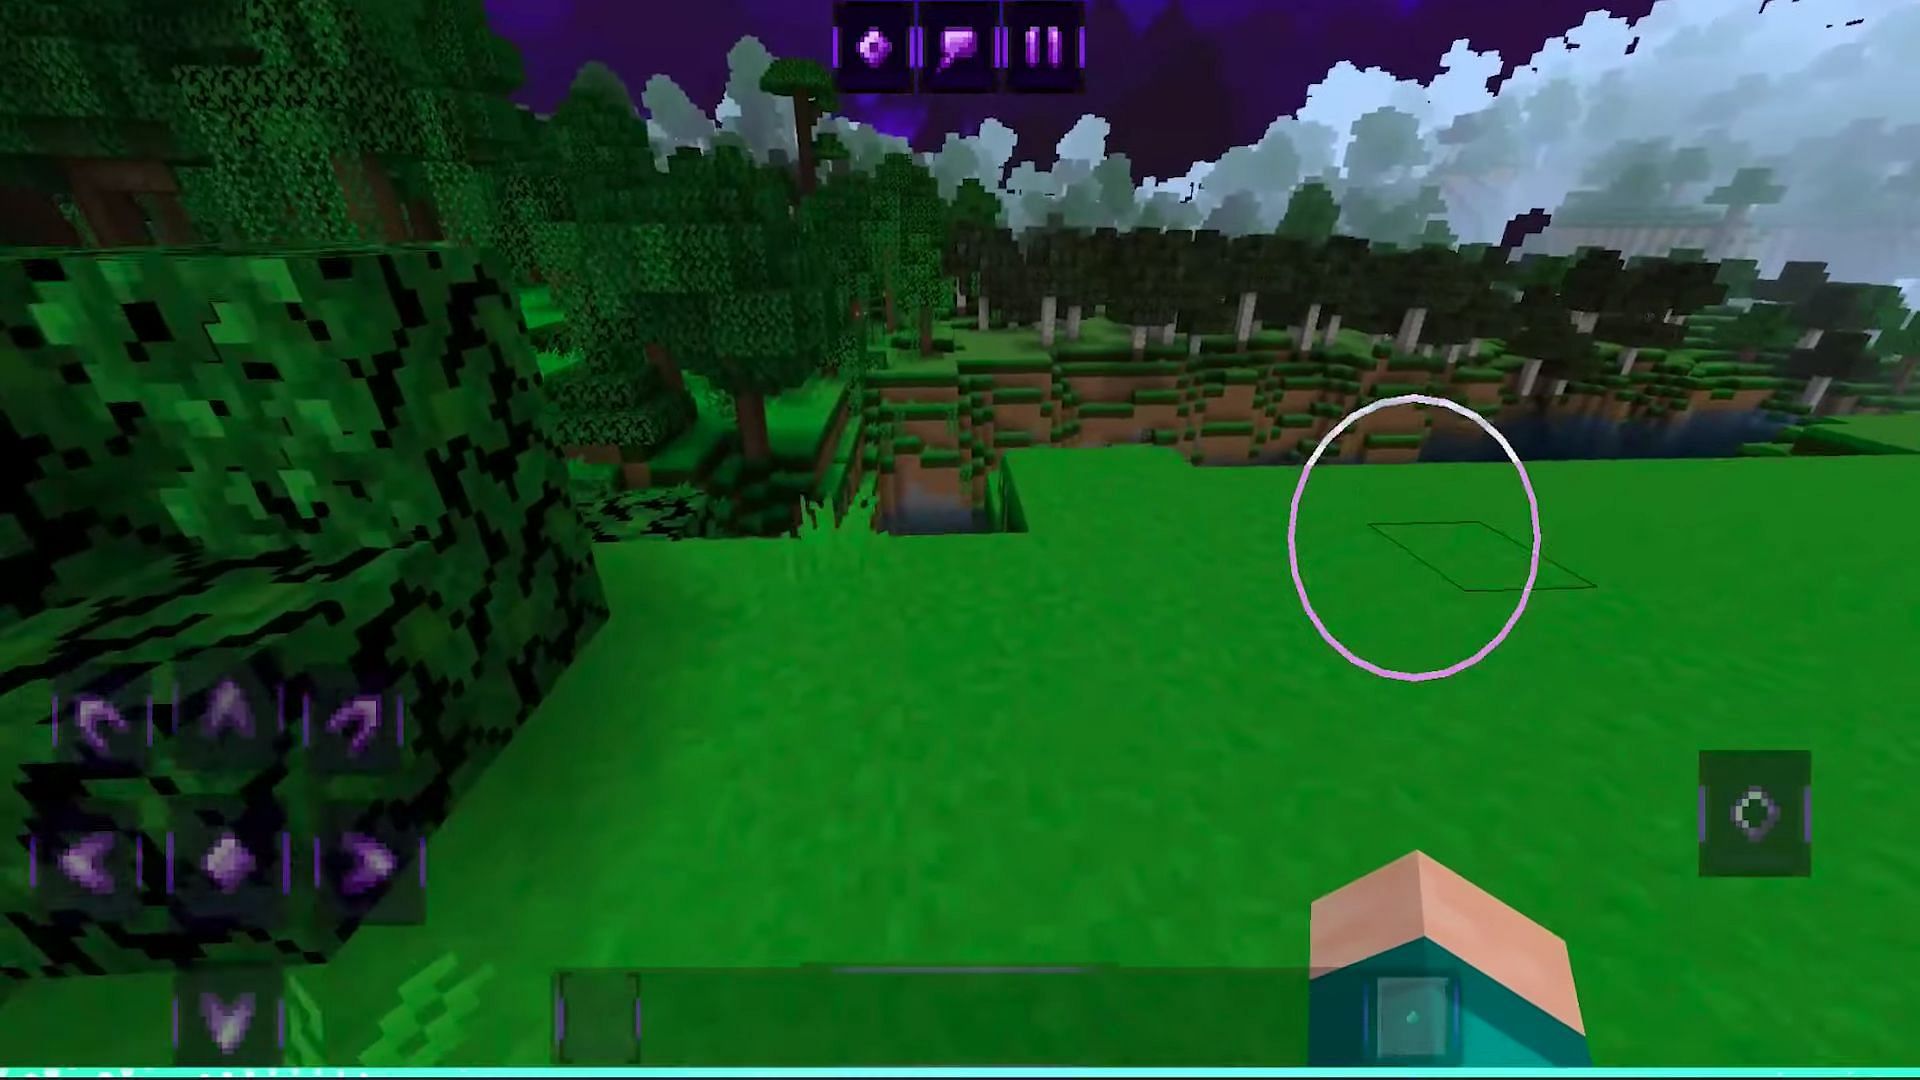 Realistic texture packs can help Minecraft feel like an entirely different game (Image via THE DEMON/YouTube)